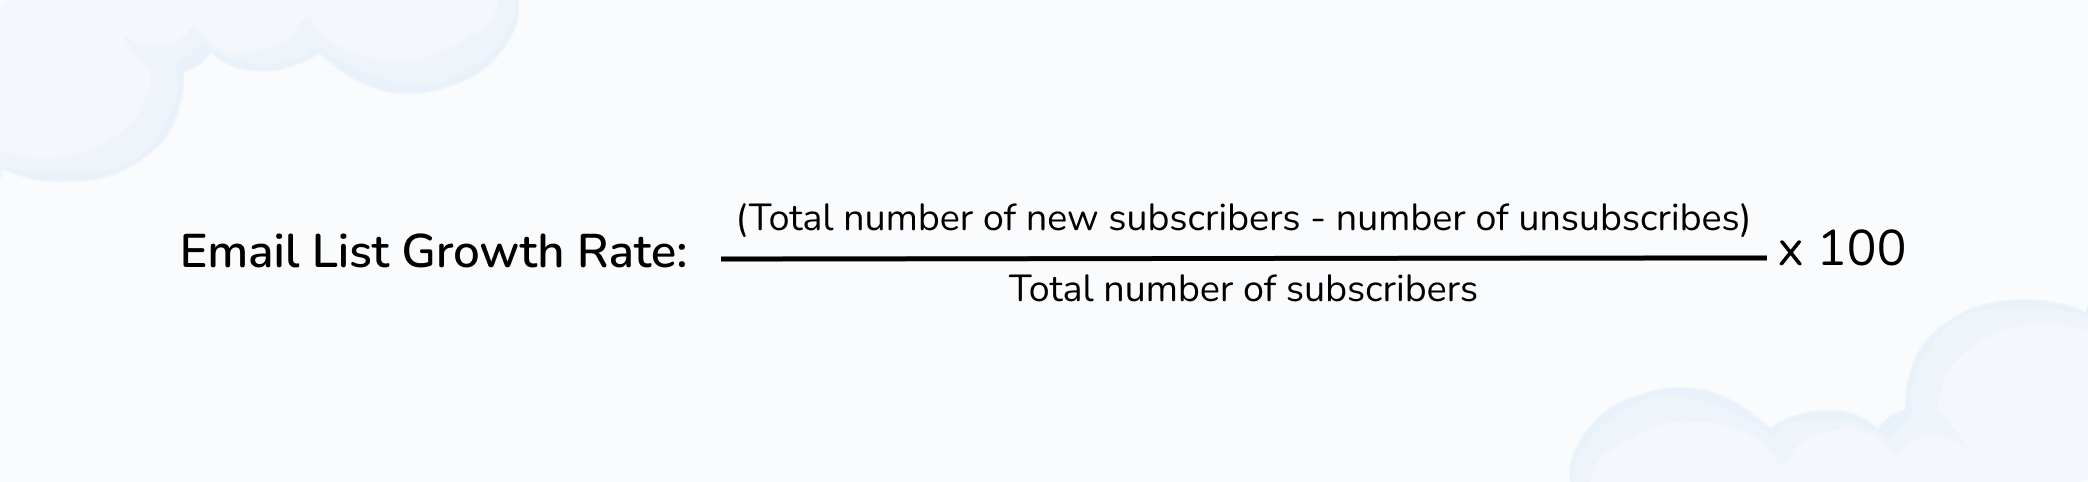 Email list growth rate formula